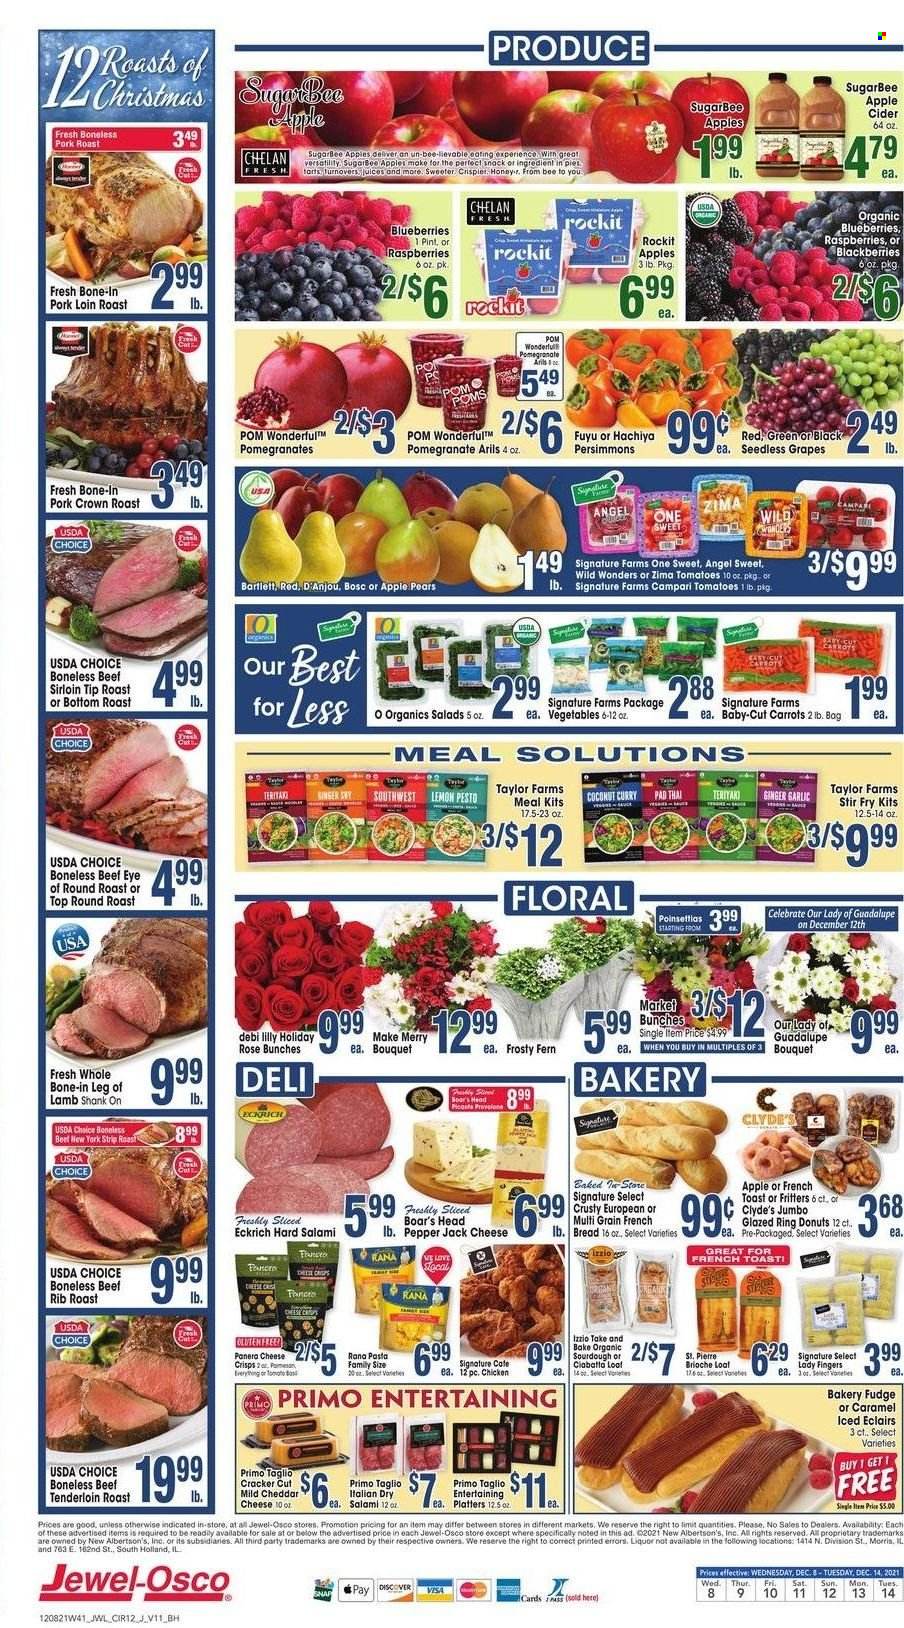 thumbnail - Jewel Osco Flyer - 12/08/2021 - 12/14/2021 - Sales products - seedless grapes, persimmons, bread, donut, carrots, garlic, ginger, tomatoes, blackberries, blueberries, grapes, pears, pasta, Rana, salami, mild cheddar, cheddar, Pepper Jack cheese, cheese, fudge, lady fingers, snack, crackers, pesto, honey, wine, rosé wine, apple cider, cider, beef meat, beef sirloin, beef tenderloin, eye of round, round roast, pork loin, pork meat, pork roast, lamb meat, lamb shank, lamb leg, poinsettia, bunches, bouquet, rose, pomegranate. Page 12.